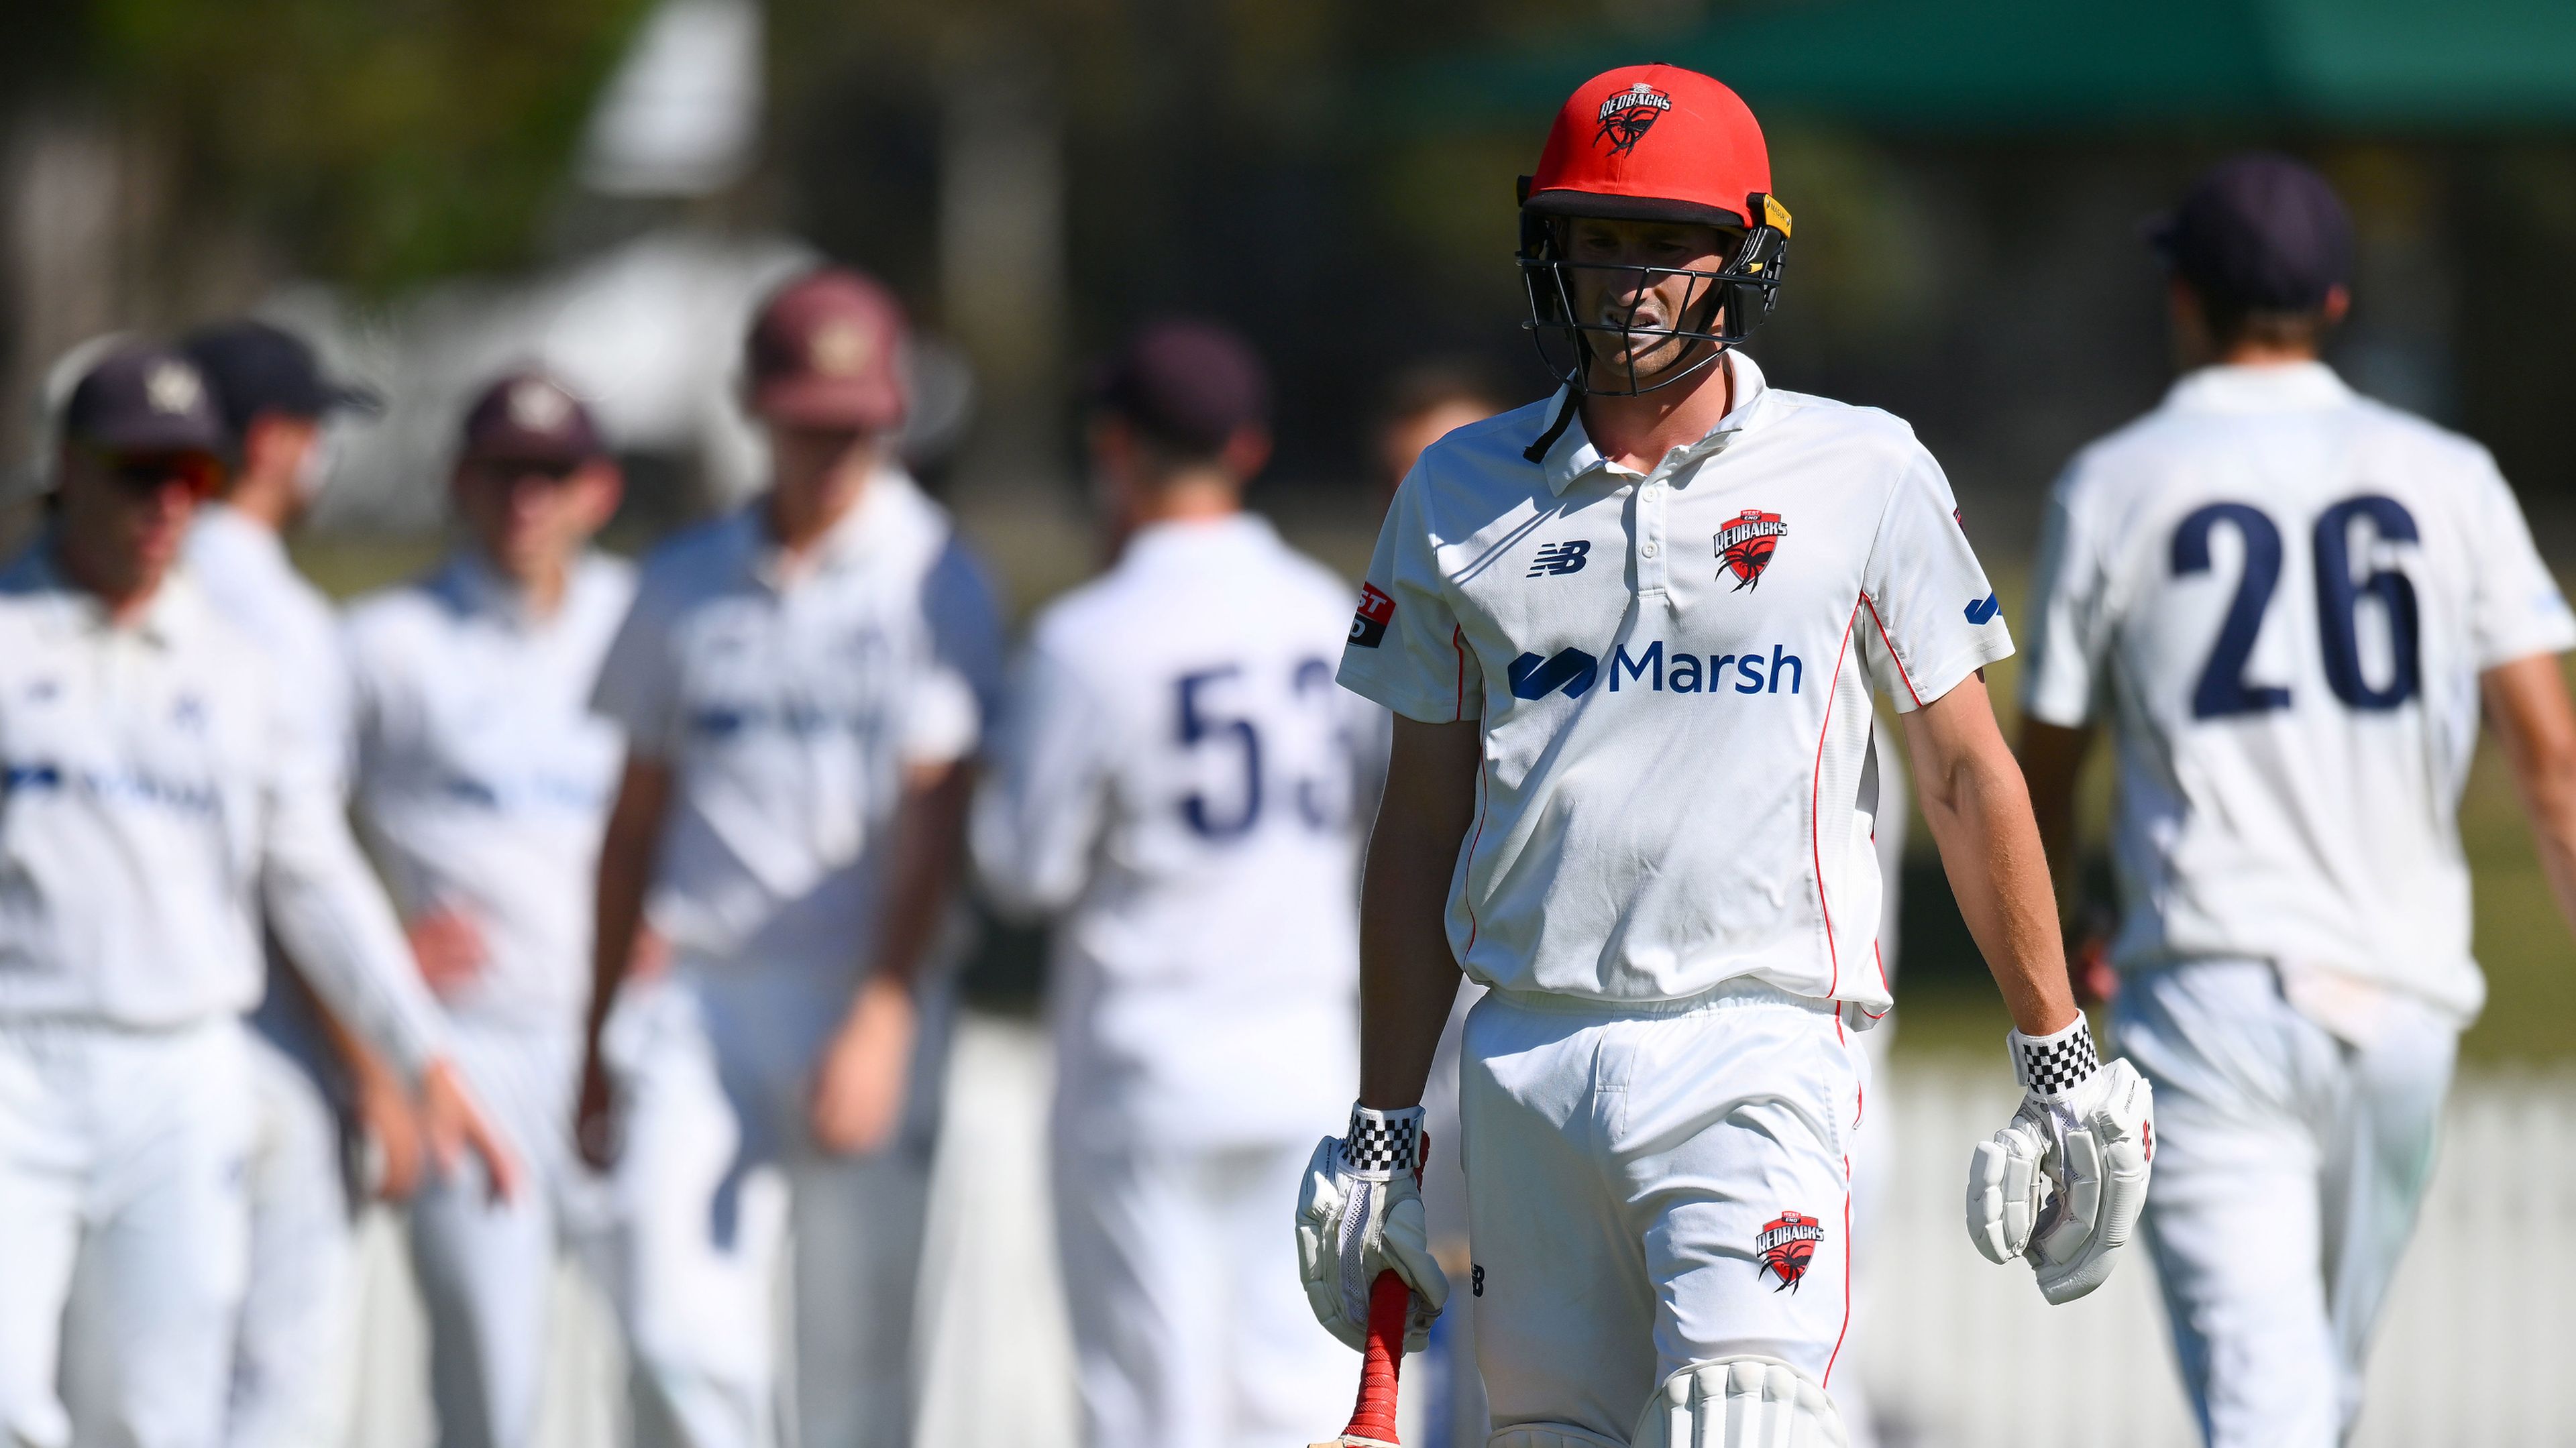 Jake Carder of the Redbacks reacts to losing his wicket during the Sheffield Shield match between Victoria and South Australia.